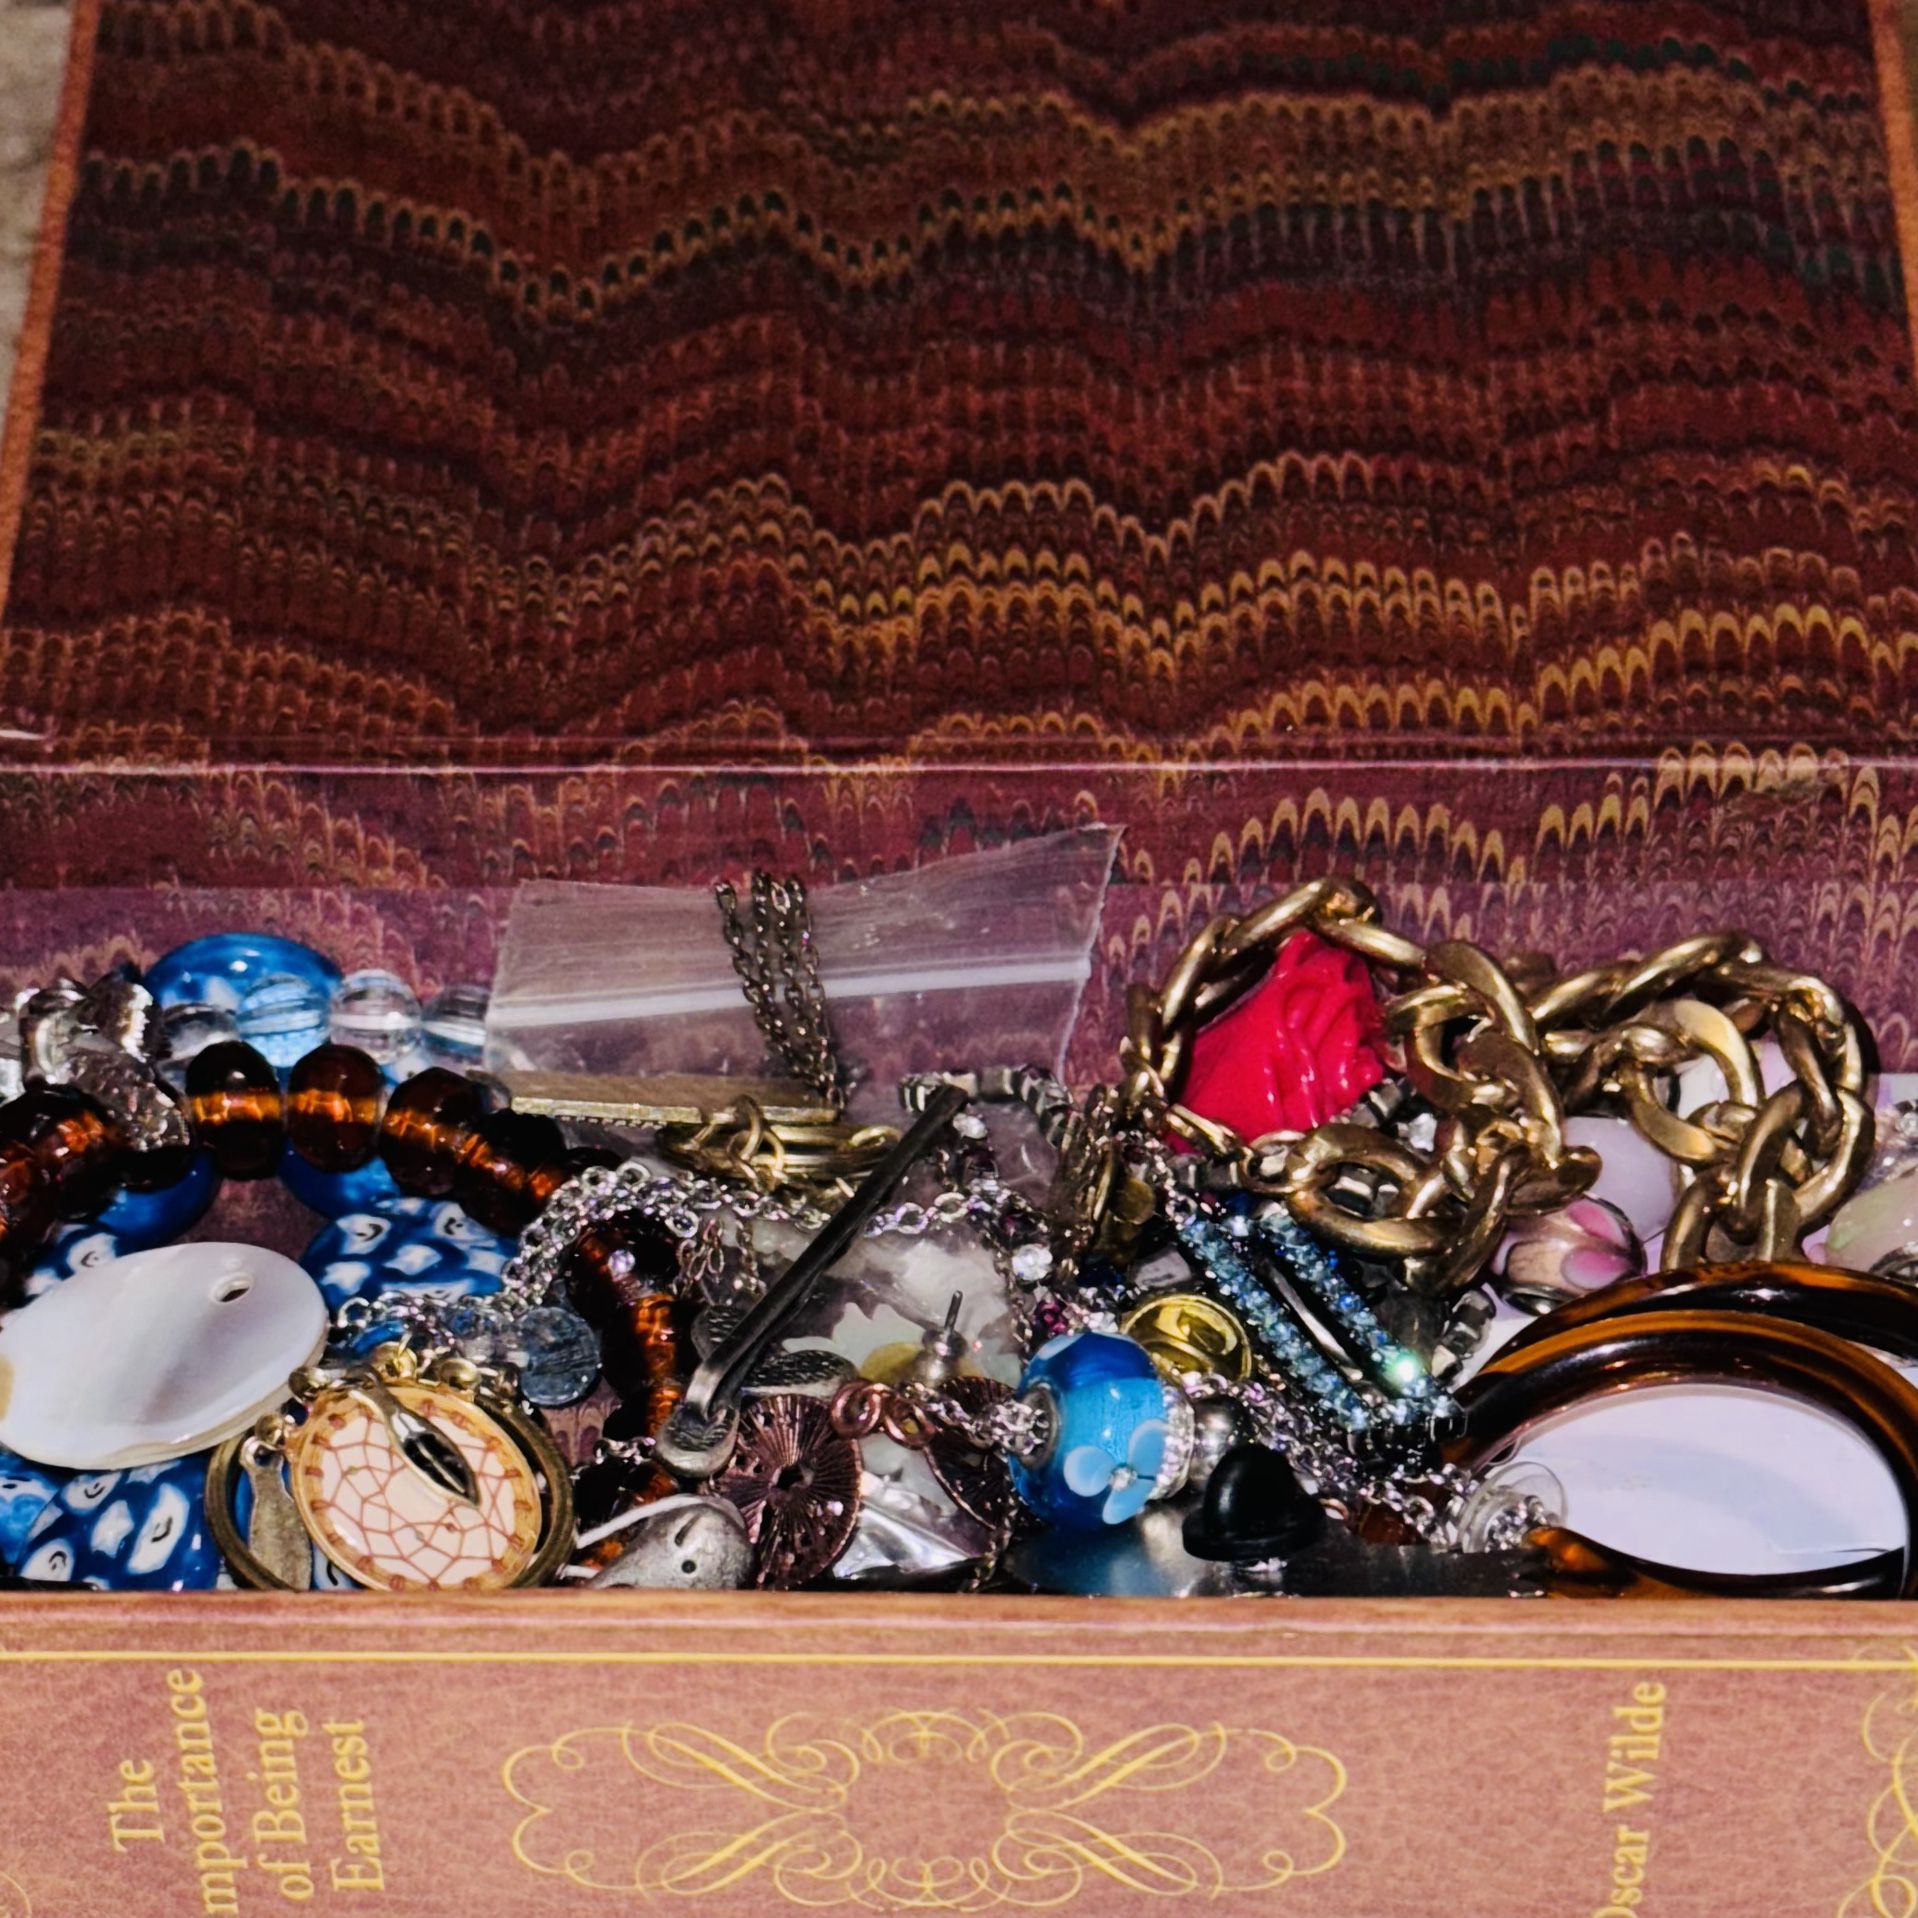 Jewelry  & Related  Items  Drawer Keychains Barrettes  Beads